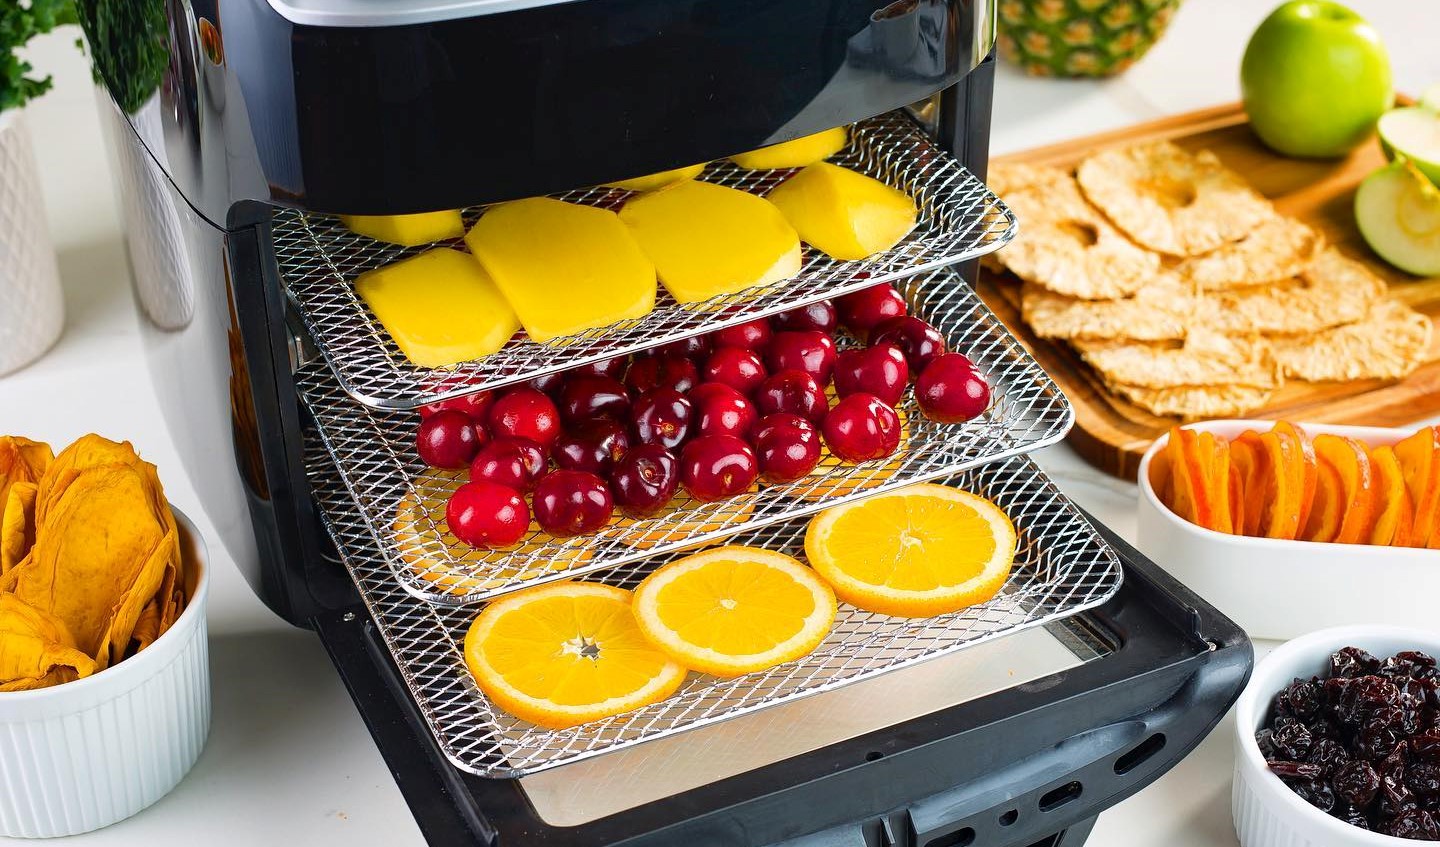 How to Dehydrate Fruit With a Dehydrator